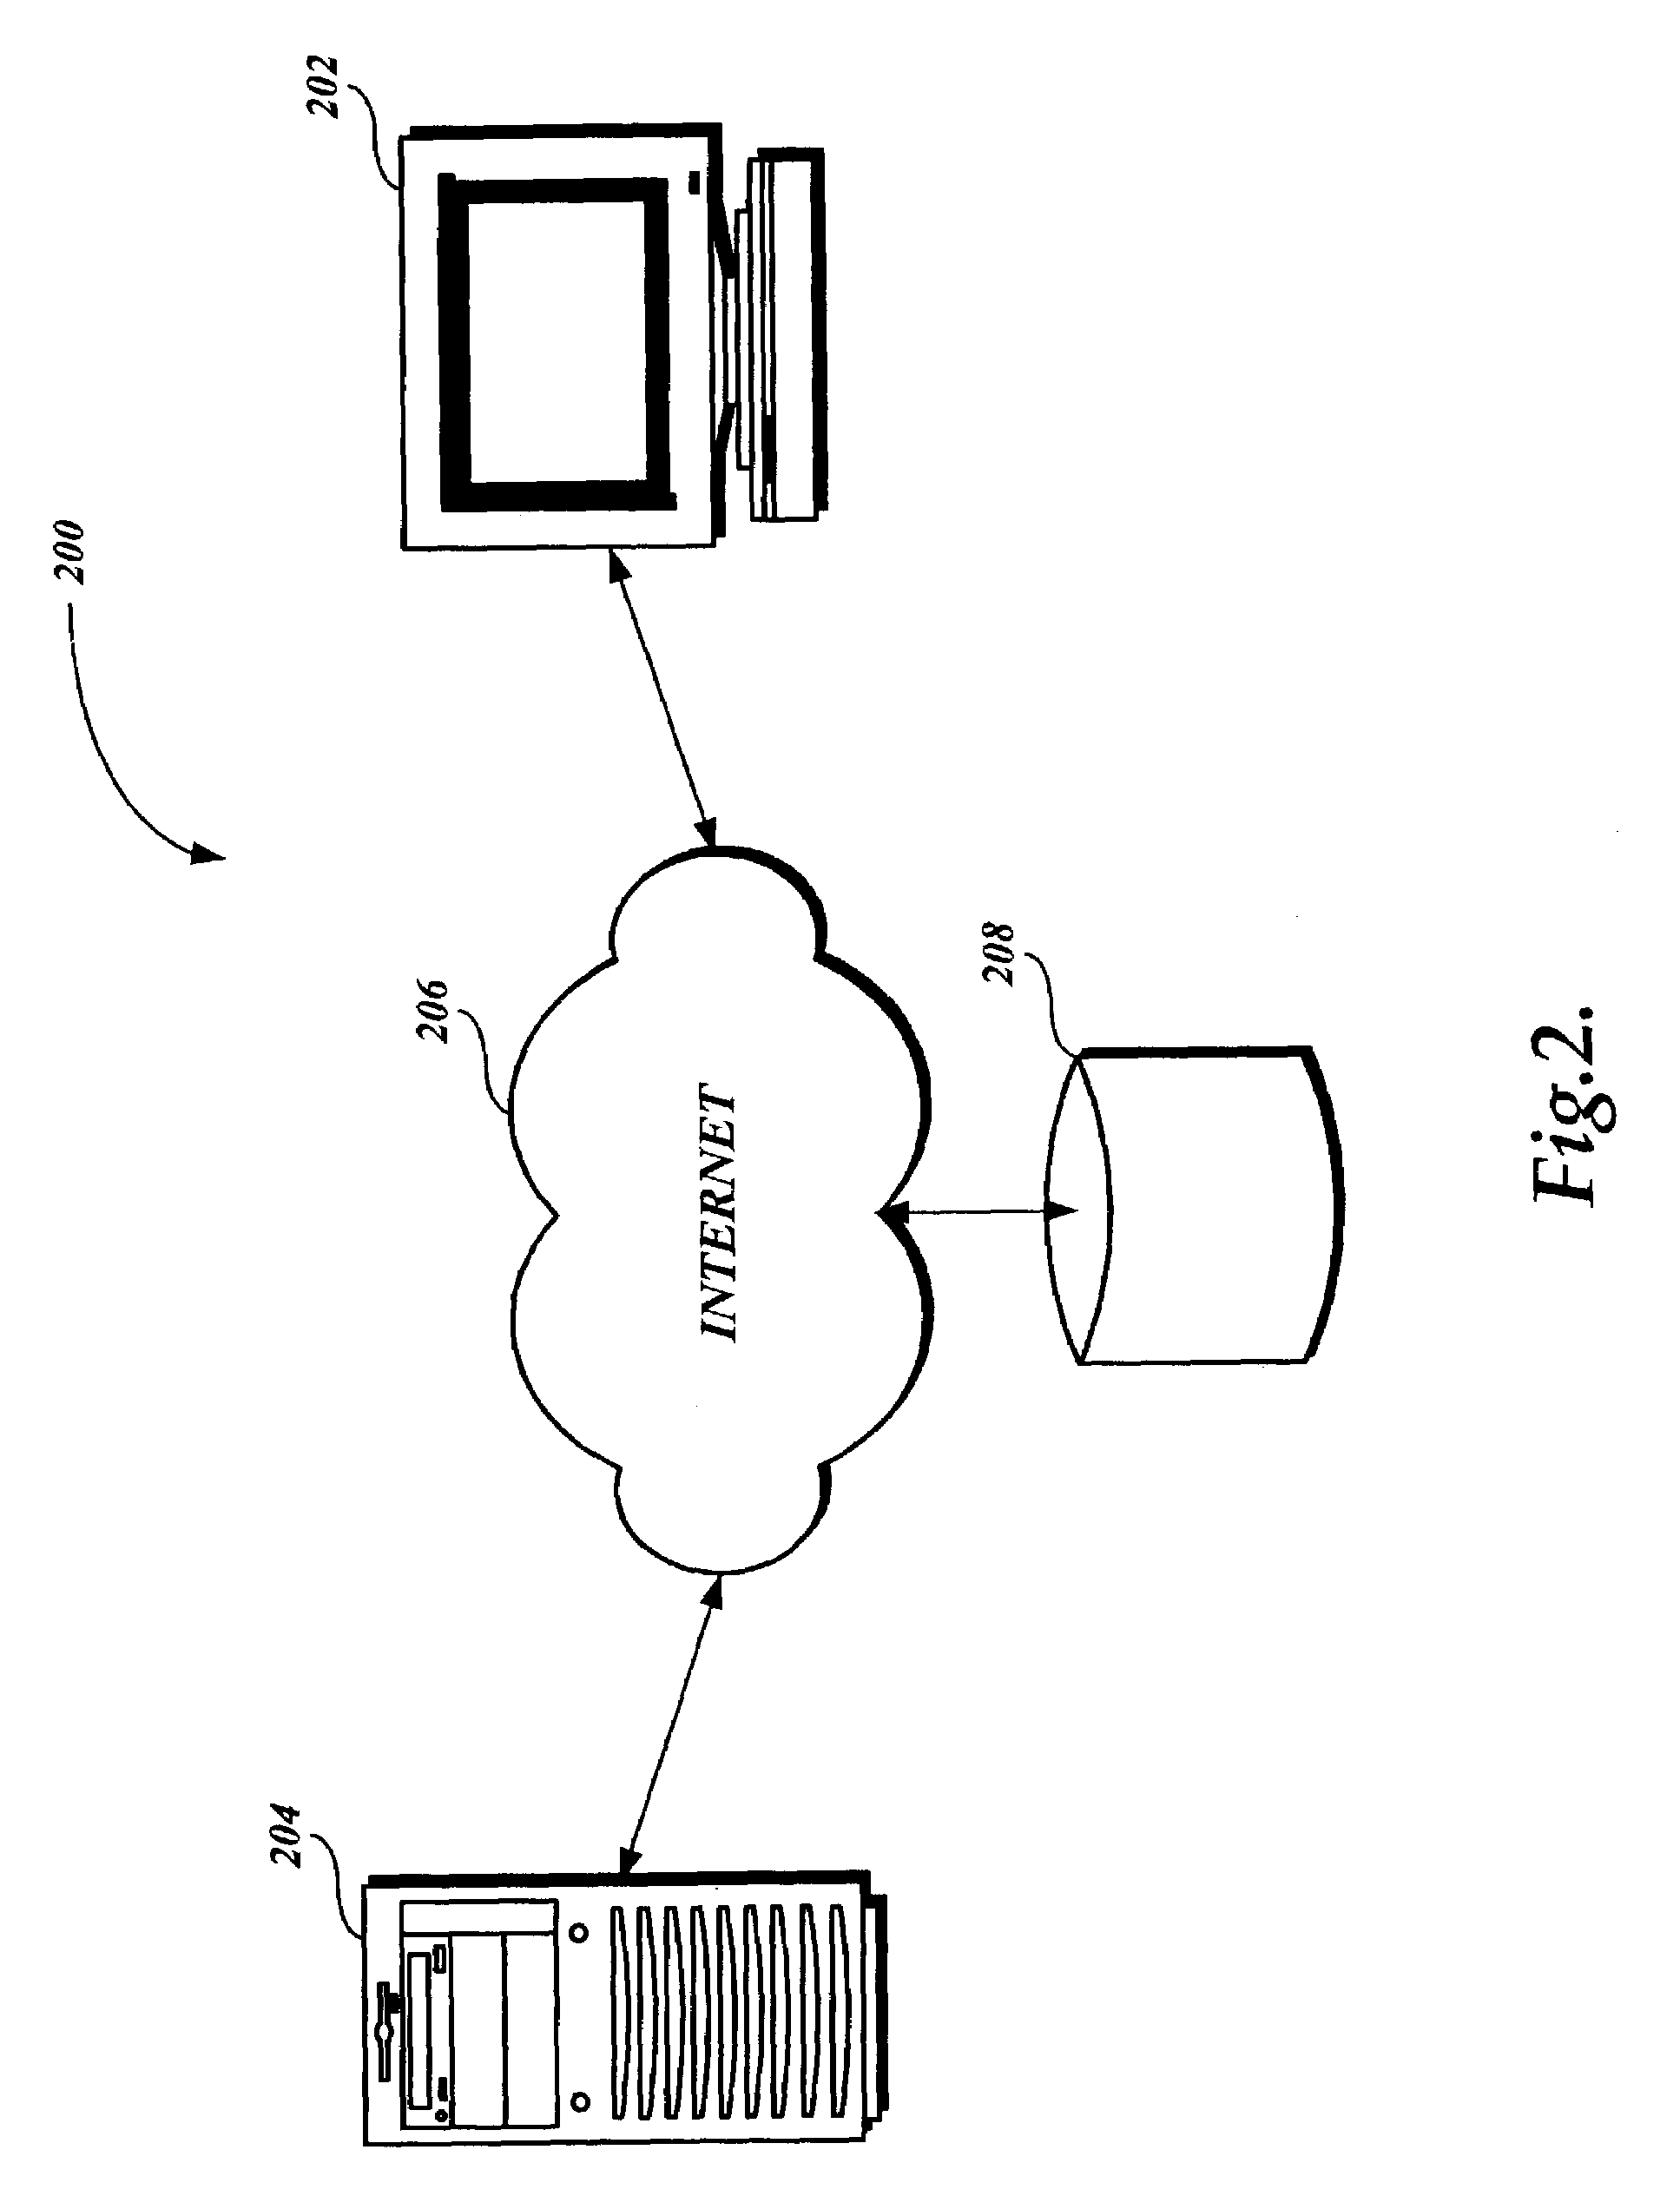 System and method for accessing remote screen content